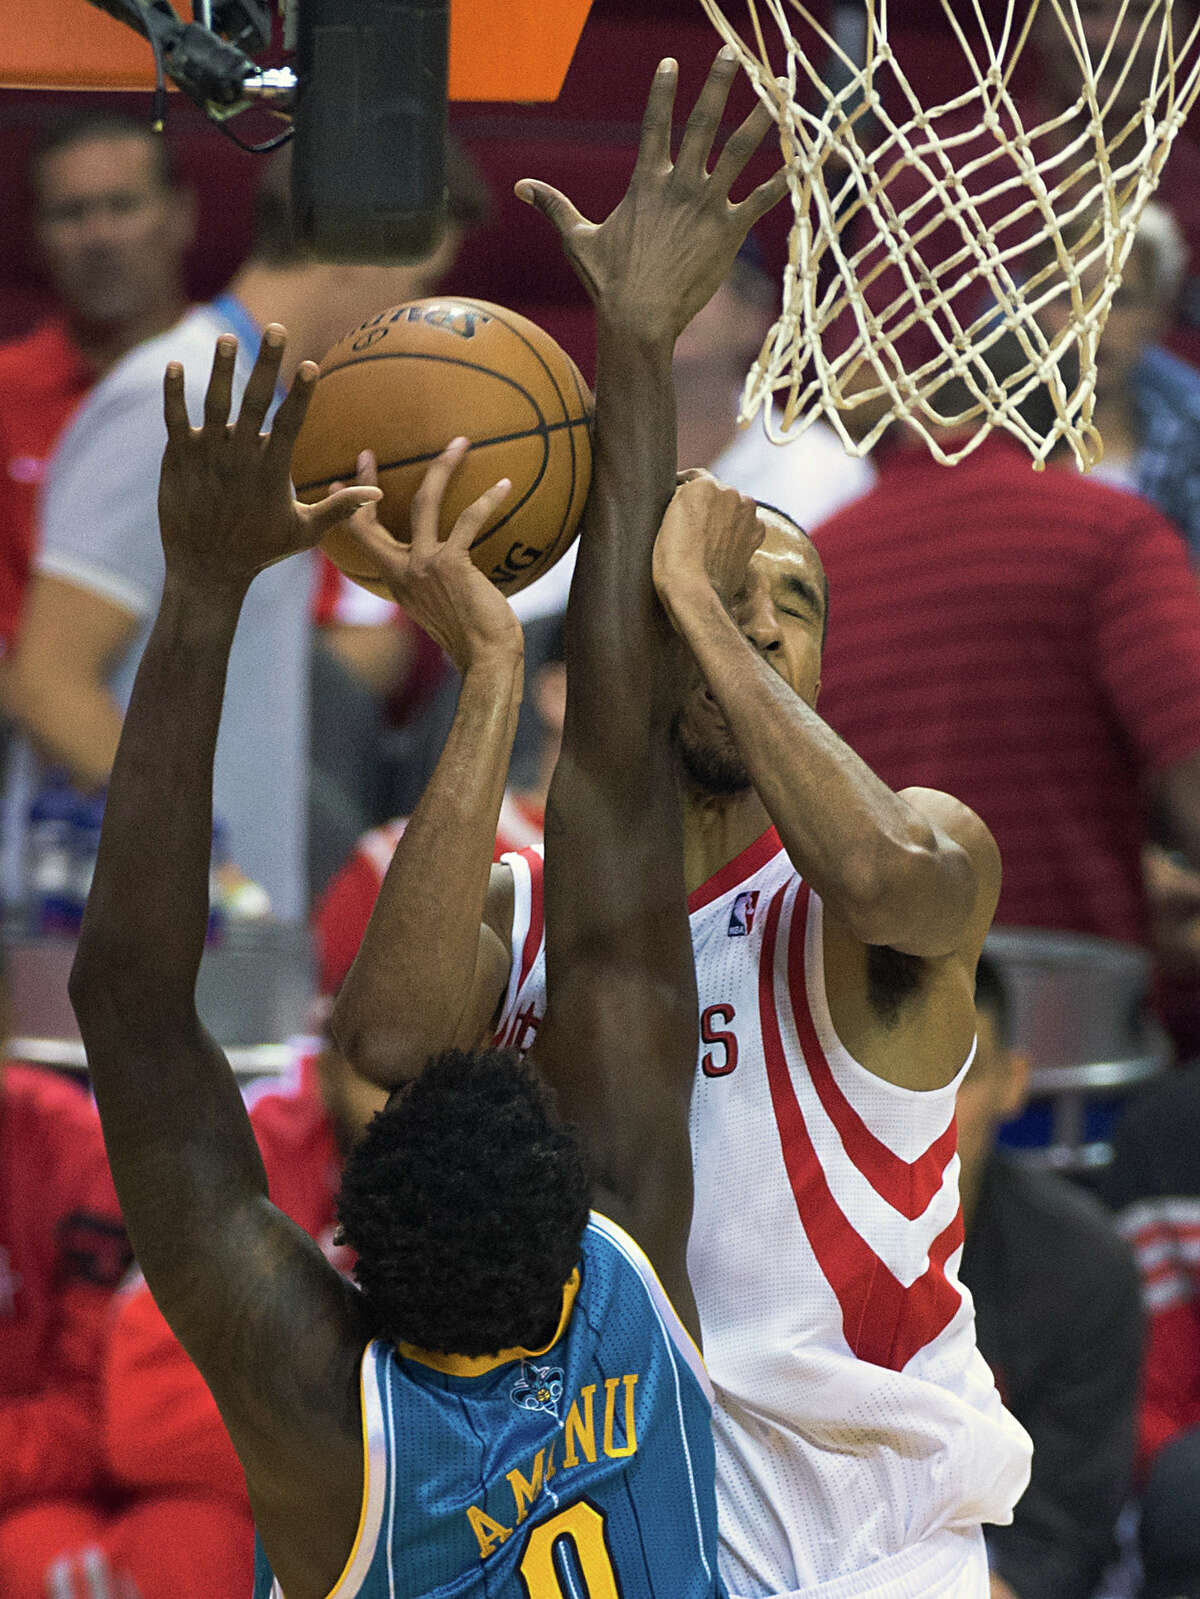 A bump in a preseason game is nothing compared to the hard knocks Rockets guard Shaun Livinston, right, has endured in his career.